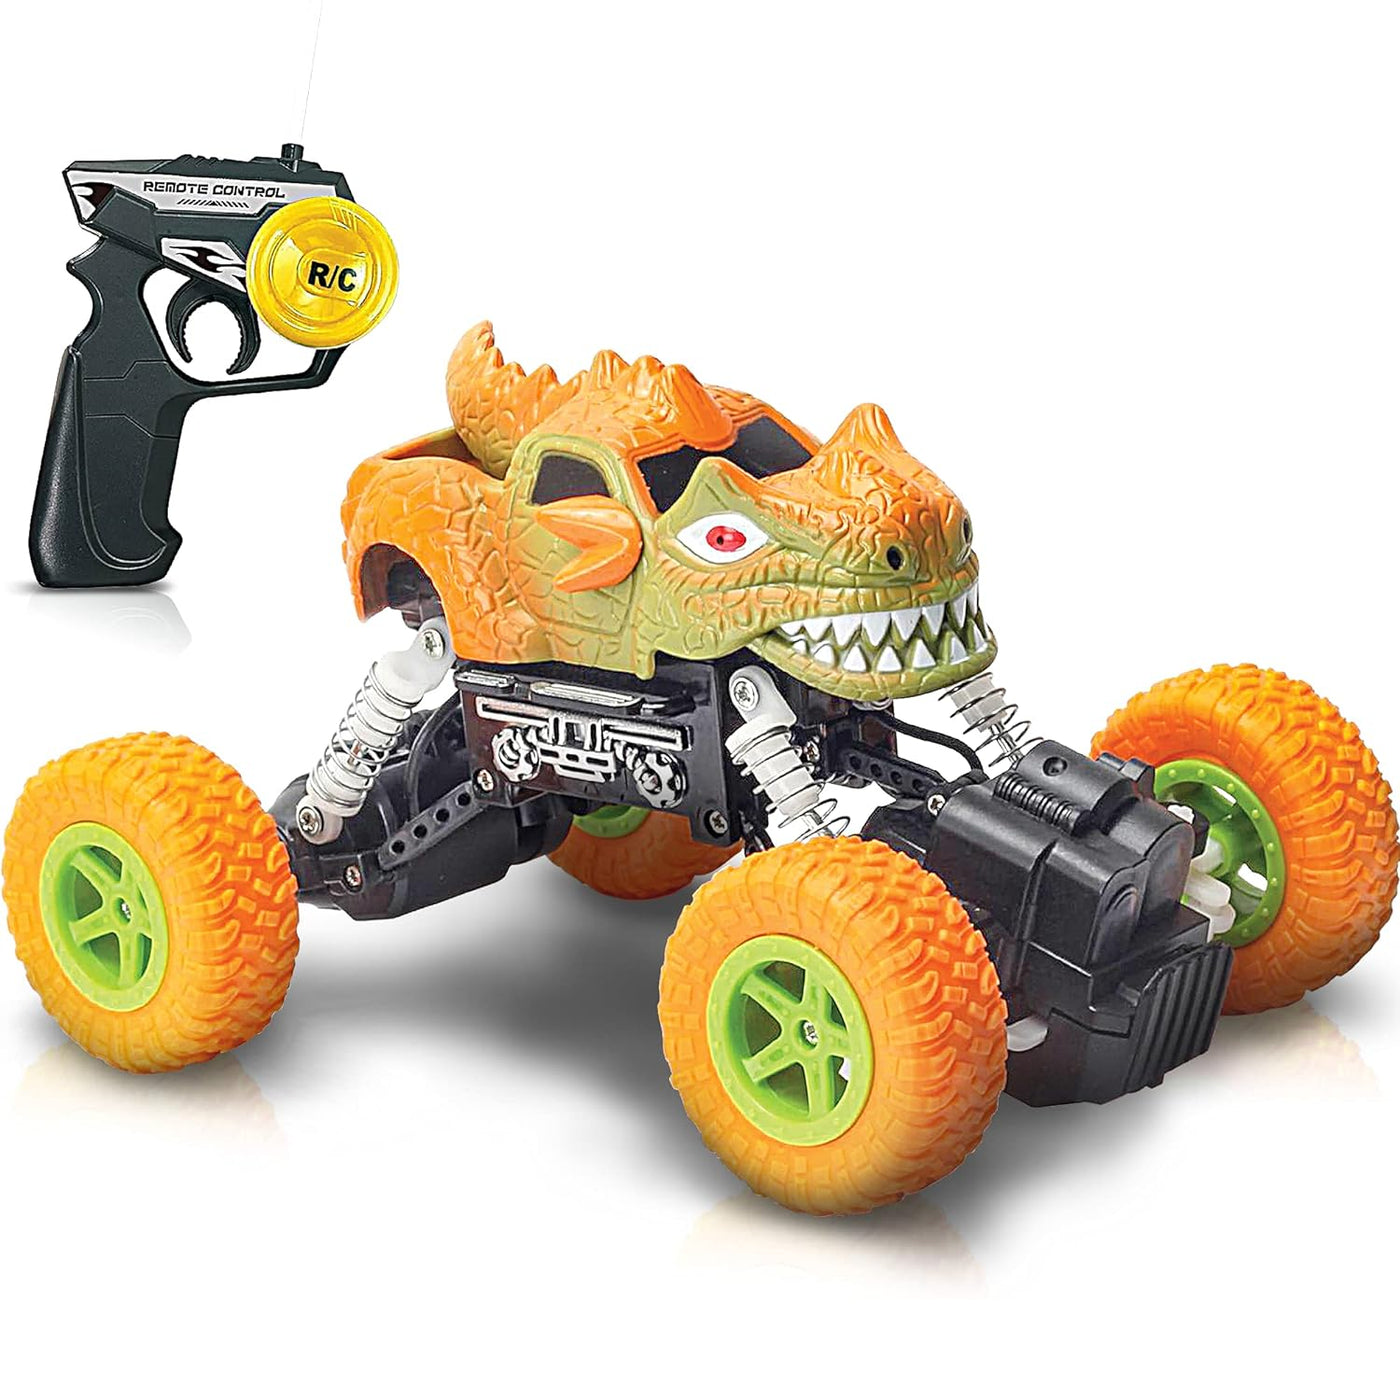 ArtCreativity 7.25” Remote Control Dinosaur Monster Truck Dino RC Toy Car | Battery Operated | Unique Birthday Gift for Boys, Girls, Toddler | Large Carnival Prize